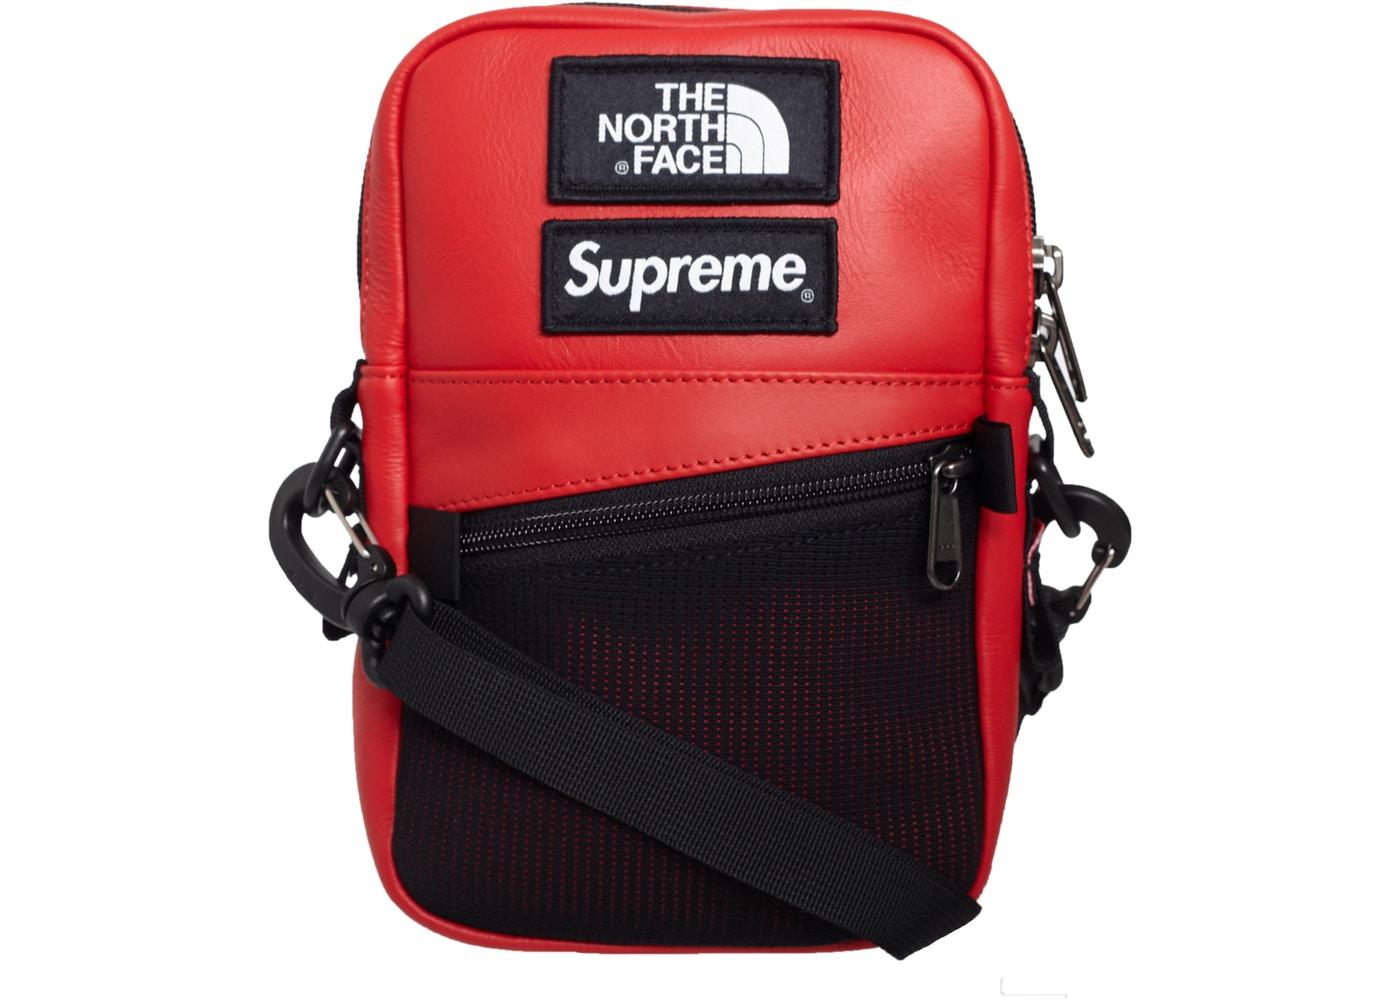 Supreme The North Face Leather Shoulder Bag Red - StockX News